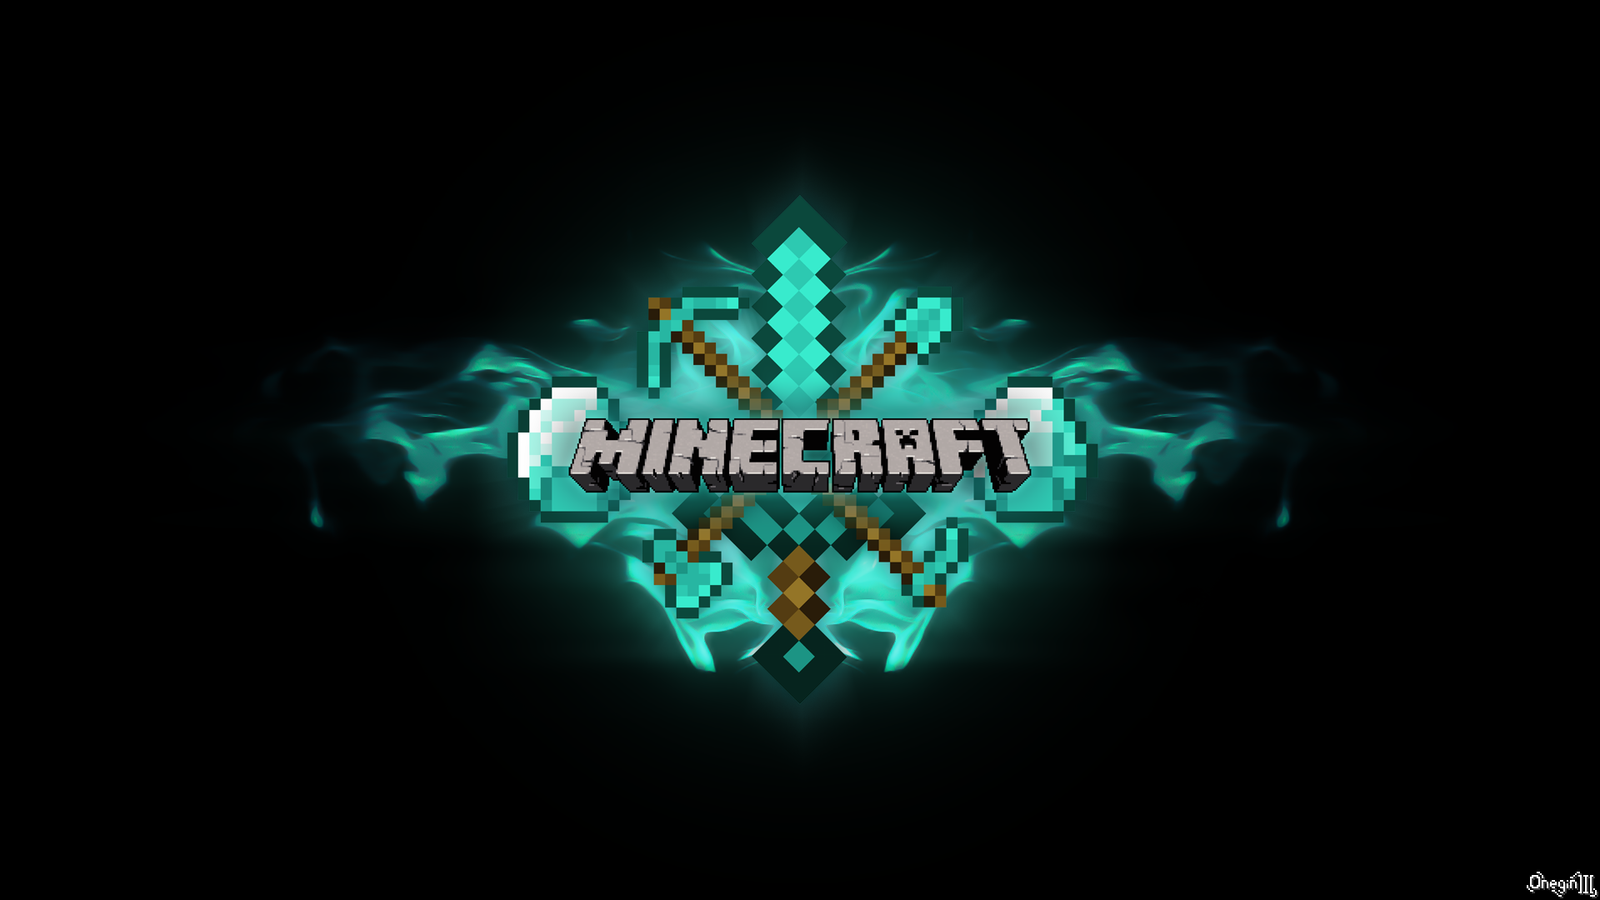 Cool Minecraft Pictures for Desktop: 09.26.16